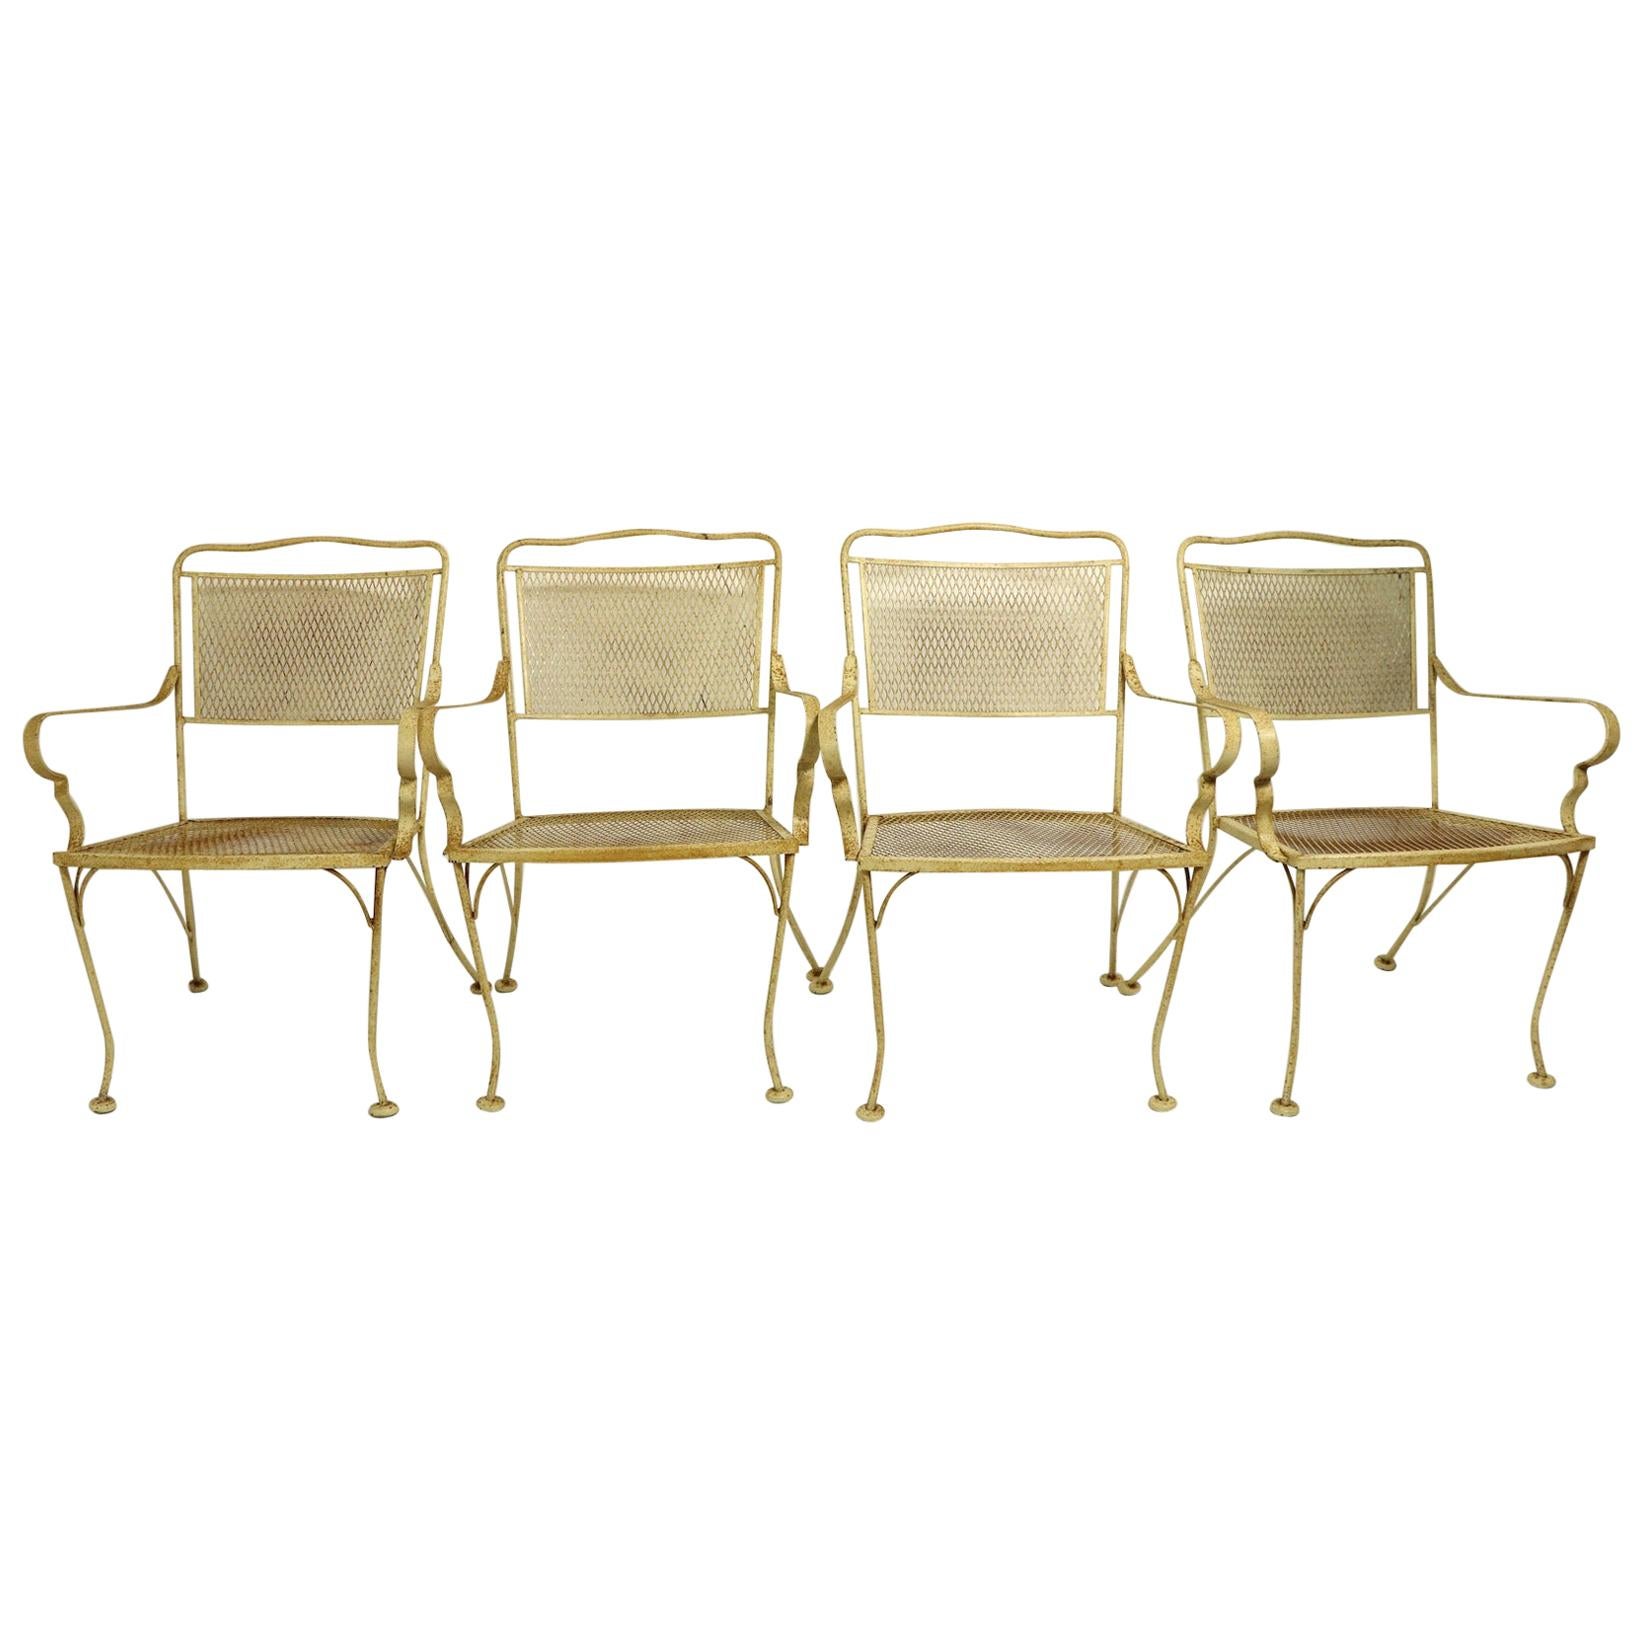 Set of Four Patio Garden Dining Chairs Attributed to Woodard